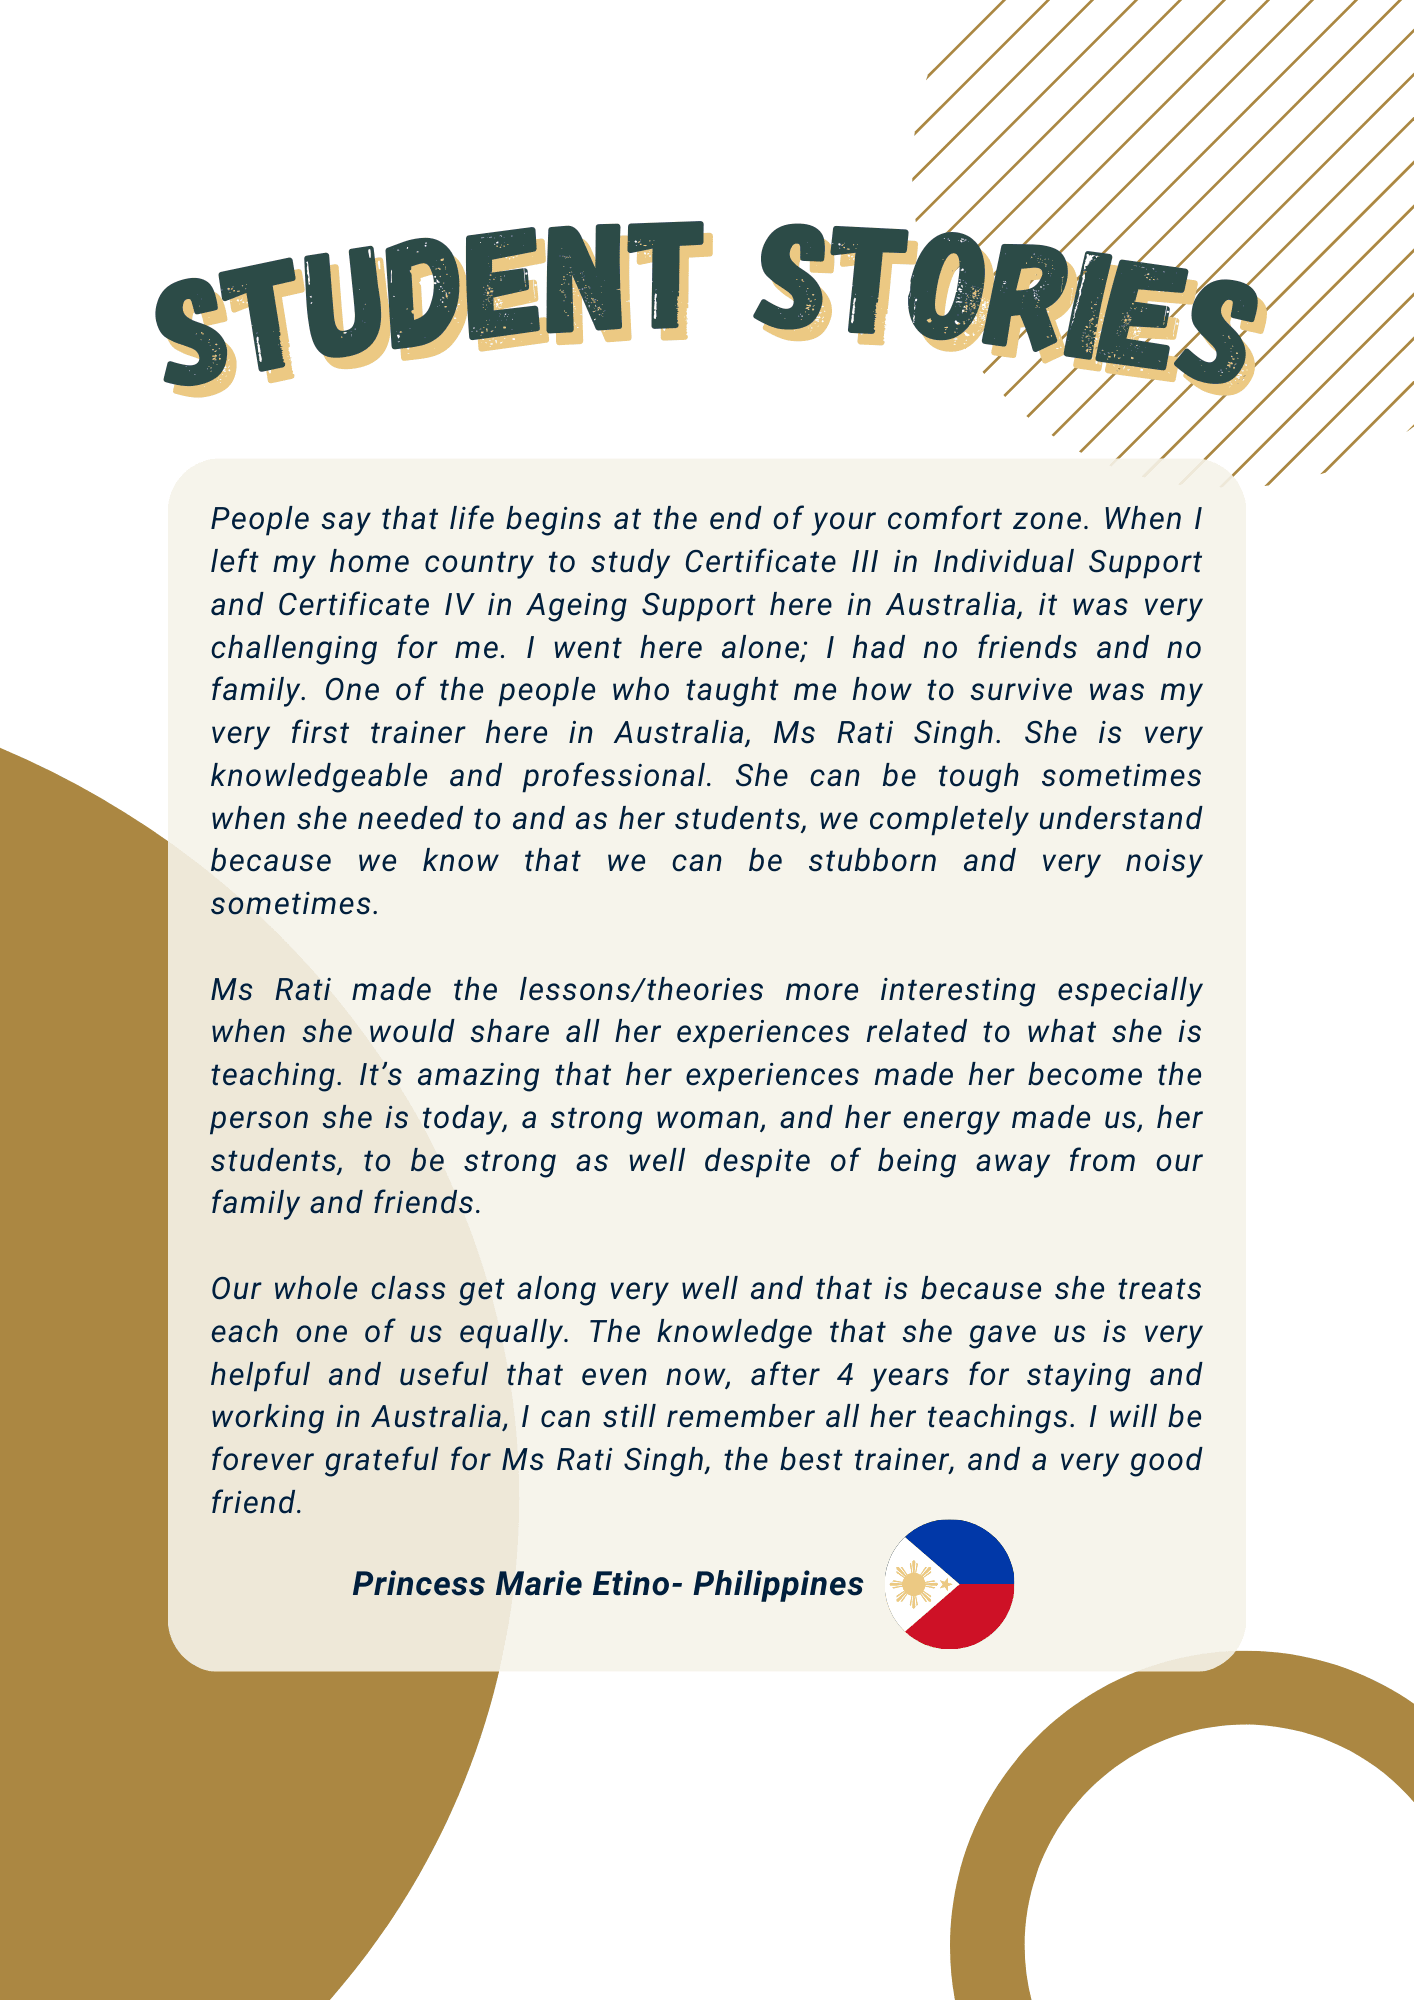 Student Stories Page 4 of 5